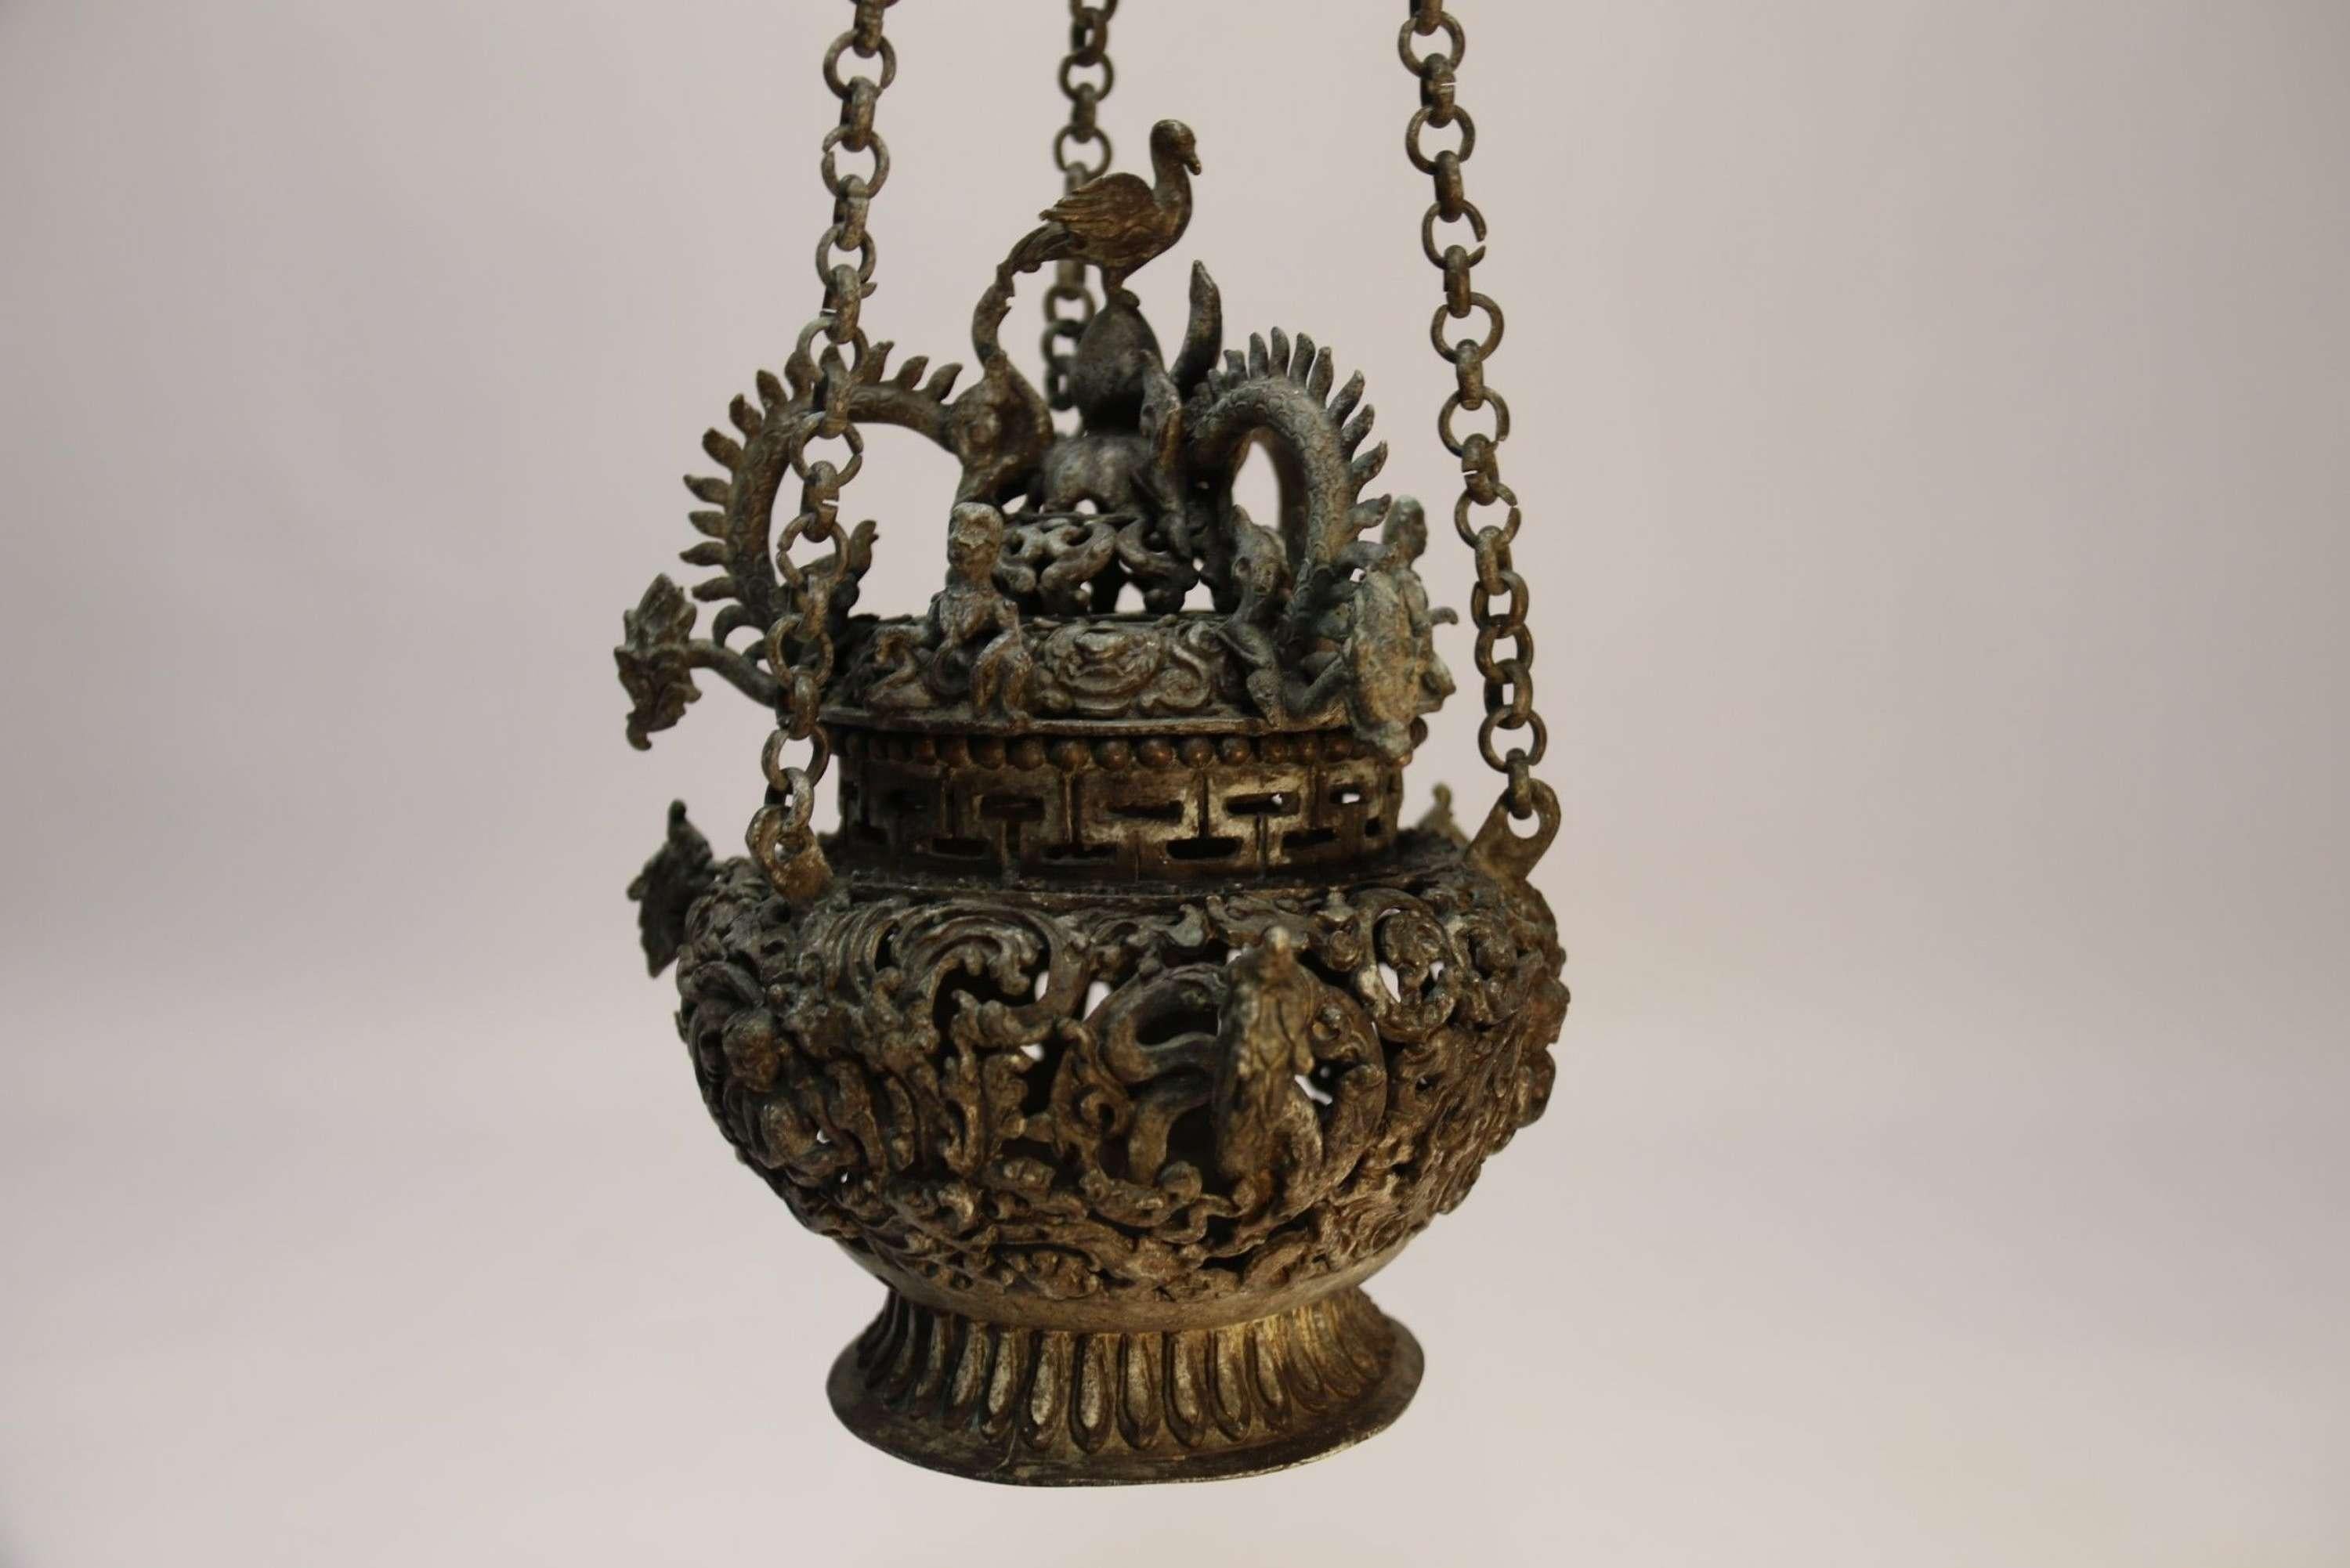 A Tibetan Bronze Incense Burner

This highly decorative piece is made from cast bronze which has a dark patina and Verdigris finish. It is cast with fine detail with figures and mythical beasts amongst a foliate design. It is made in two separate